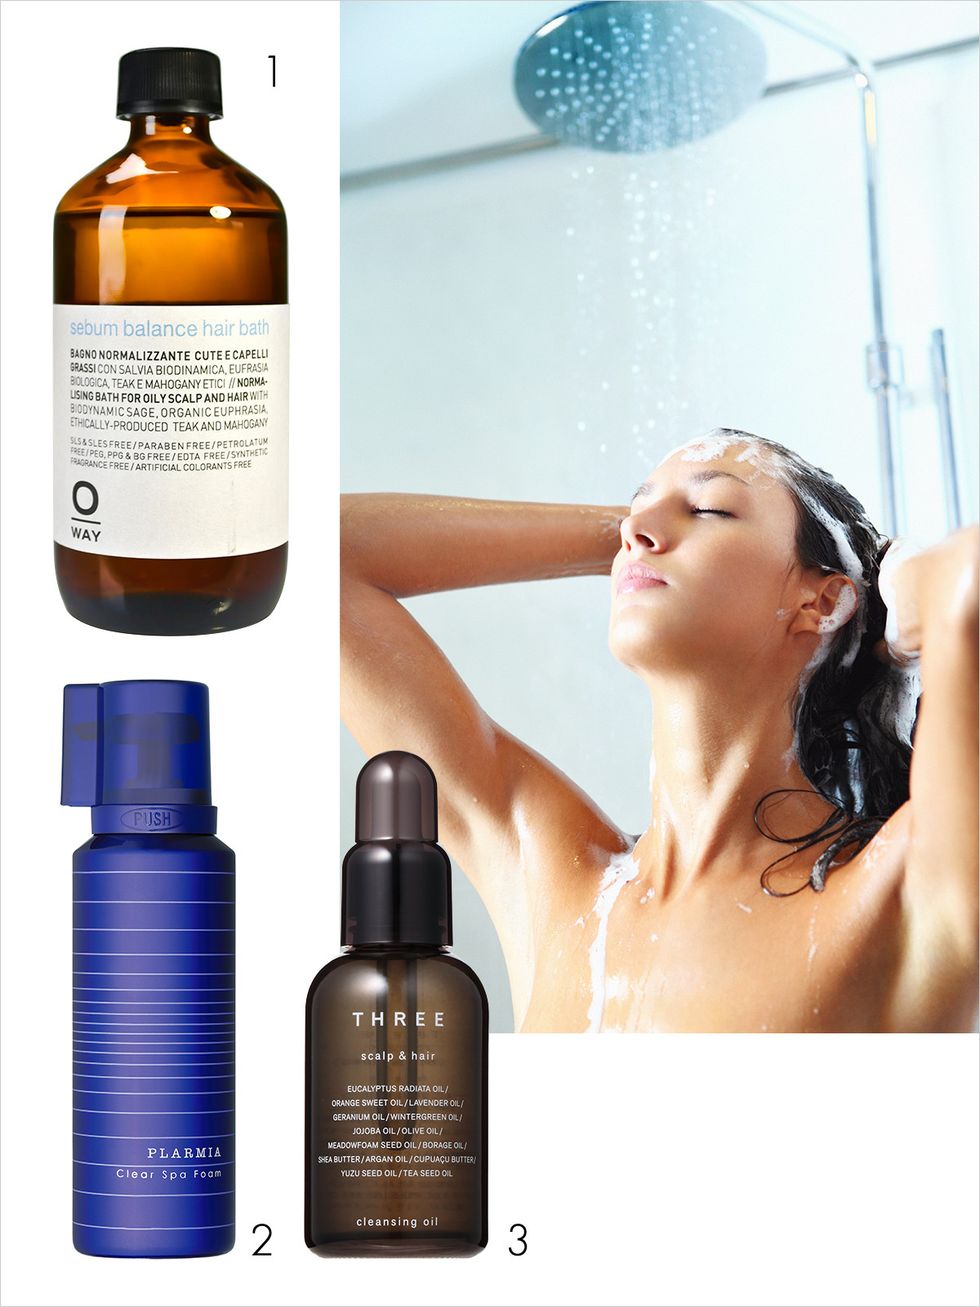 Product, Skin, Water, Beauty, Solution, Fluid, Liquid, Hand, Plastic bottle, Hair care, 